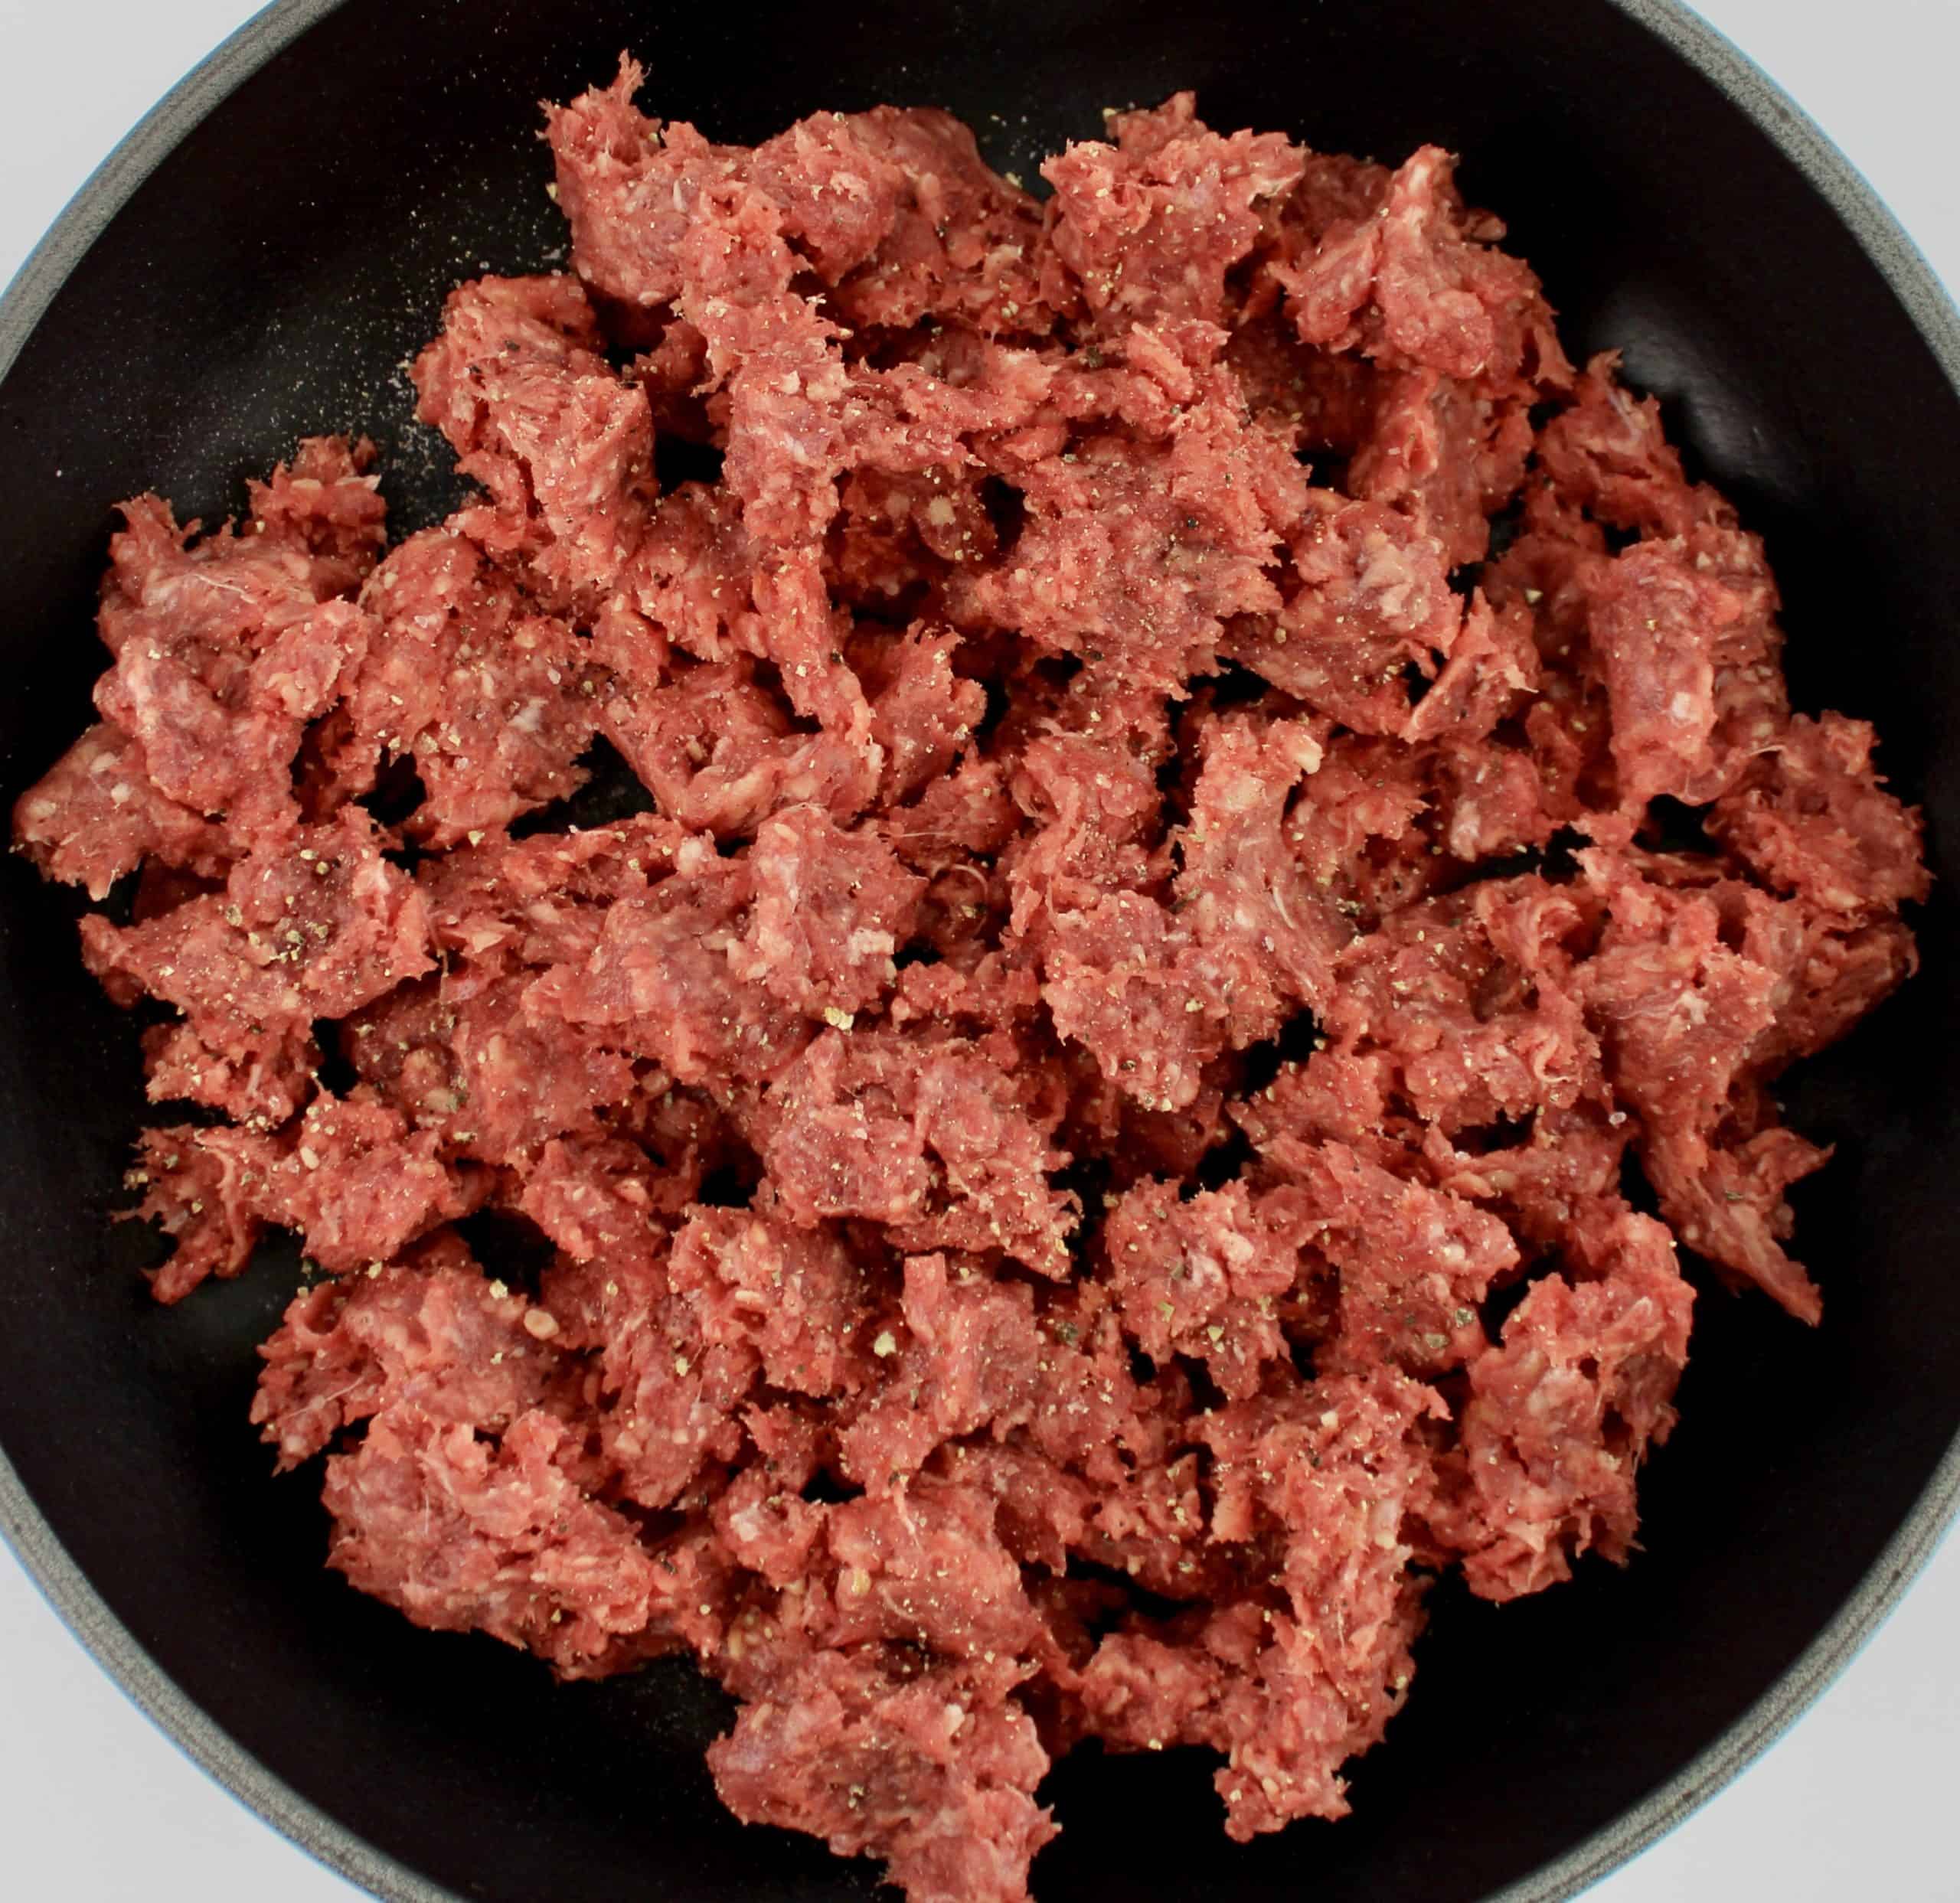 raw ground beef with salt and pepper in skillet